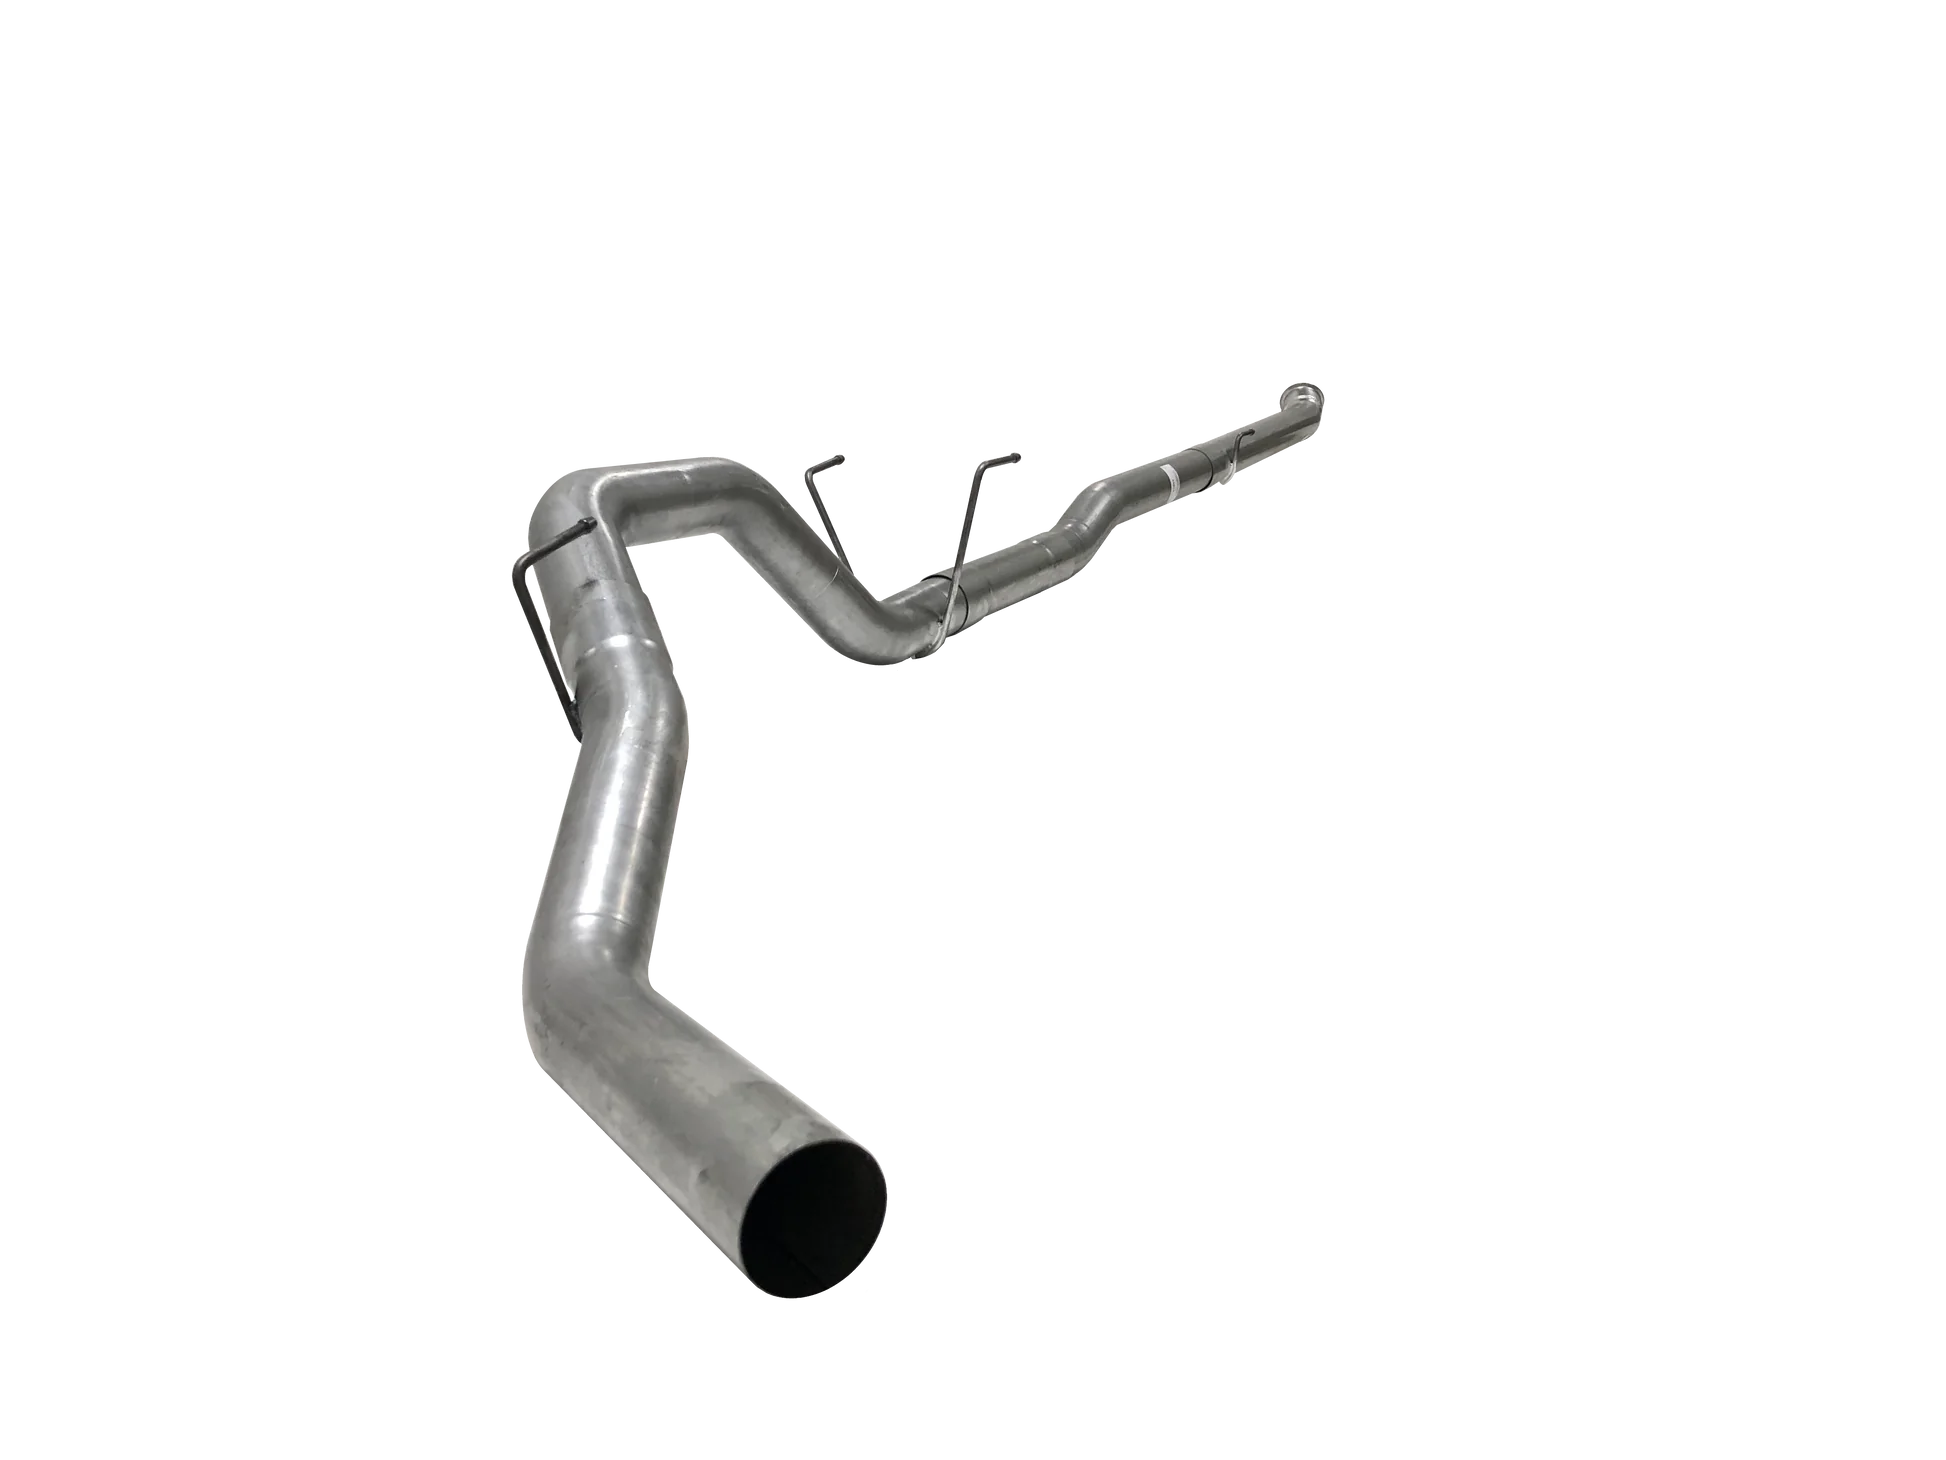 411028 411029 412028 412029 Mel's Manufacturing 4" Flex Pipe Back Single | 2019+ Ram 2500/3500 6.7L Cummins Mels Mfg FloPro Flo-Pro Flo Pro Hell On Wheels Performance Ltd Limited Canadian Owned and Operated Online Diesel Parts Distribution & Wholesale Supply Center in Alberta Canada Shipping Supplying to Alberta British Columbia Sask Saskatchewan Manitoba Ontario Quebec Newfoundland Labrador New Brunswick Nova Scotia Prince Edward Island AB BC SK MB ON QC PQ NS NB NFLD N.L. PEI